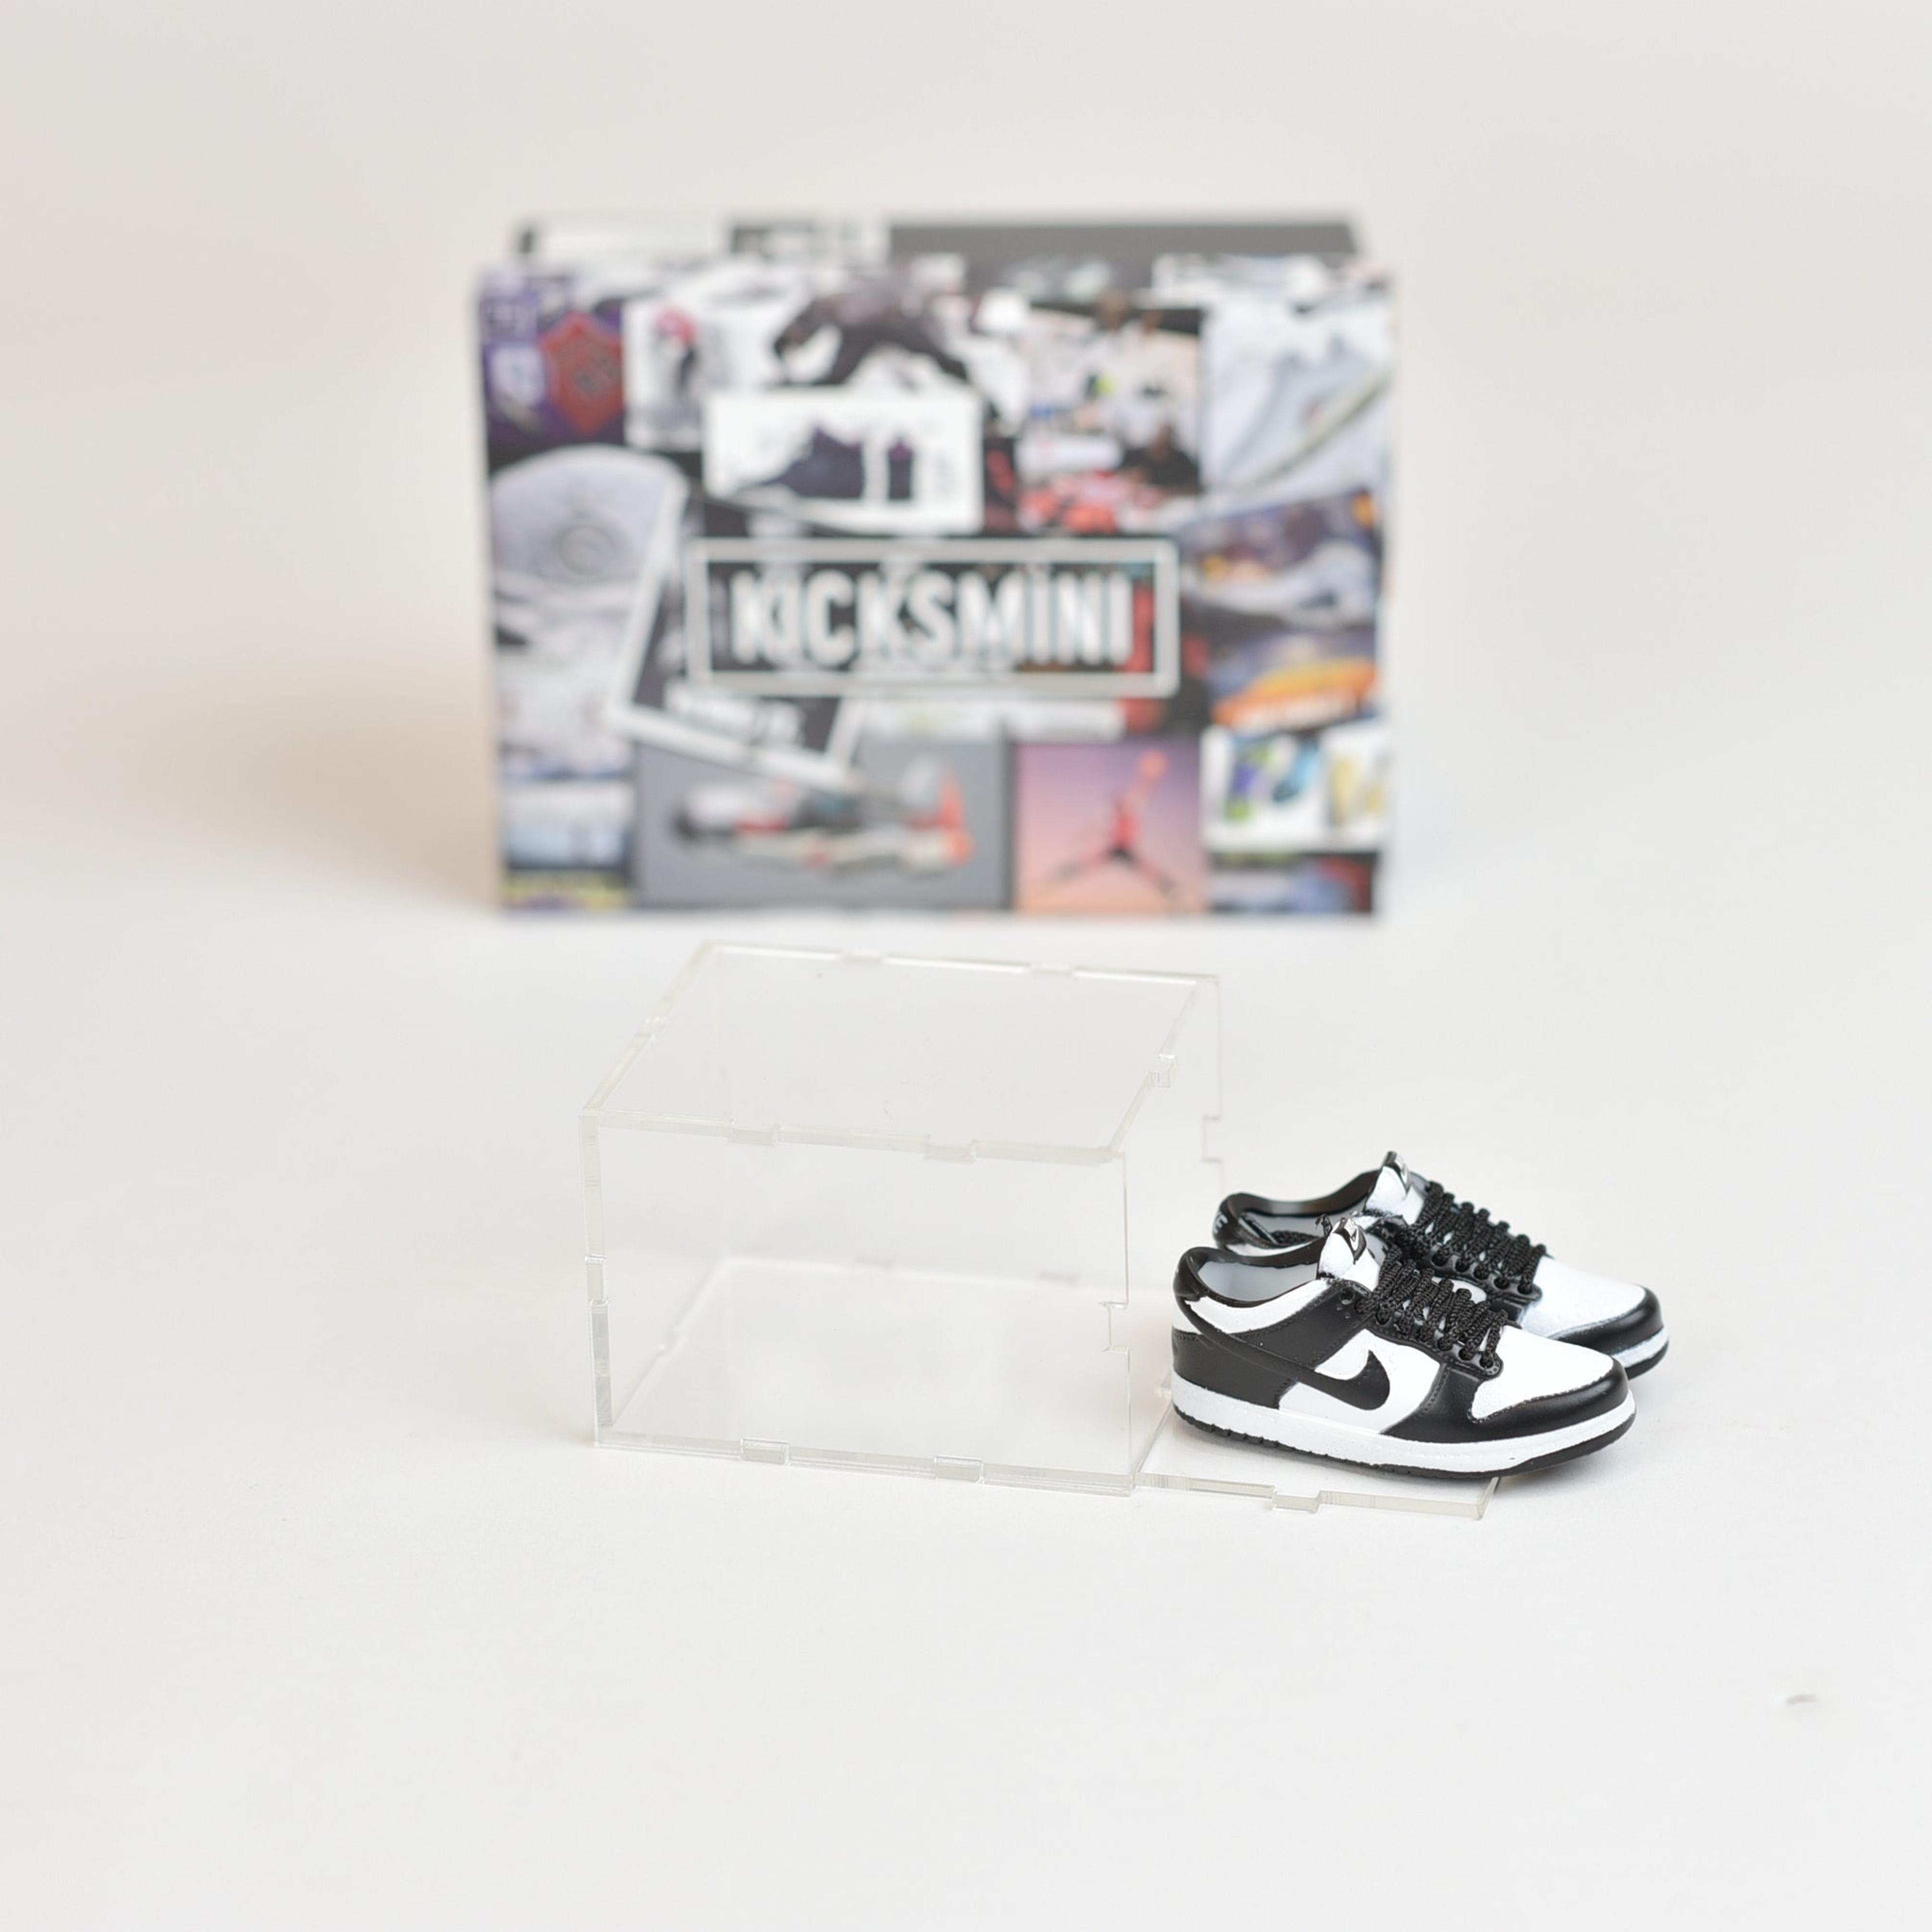 Alternate View 15 of SB Dunk Low Collaboration Mini Sneakers with Display Case